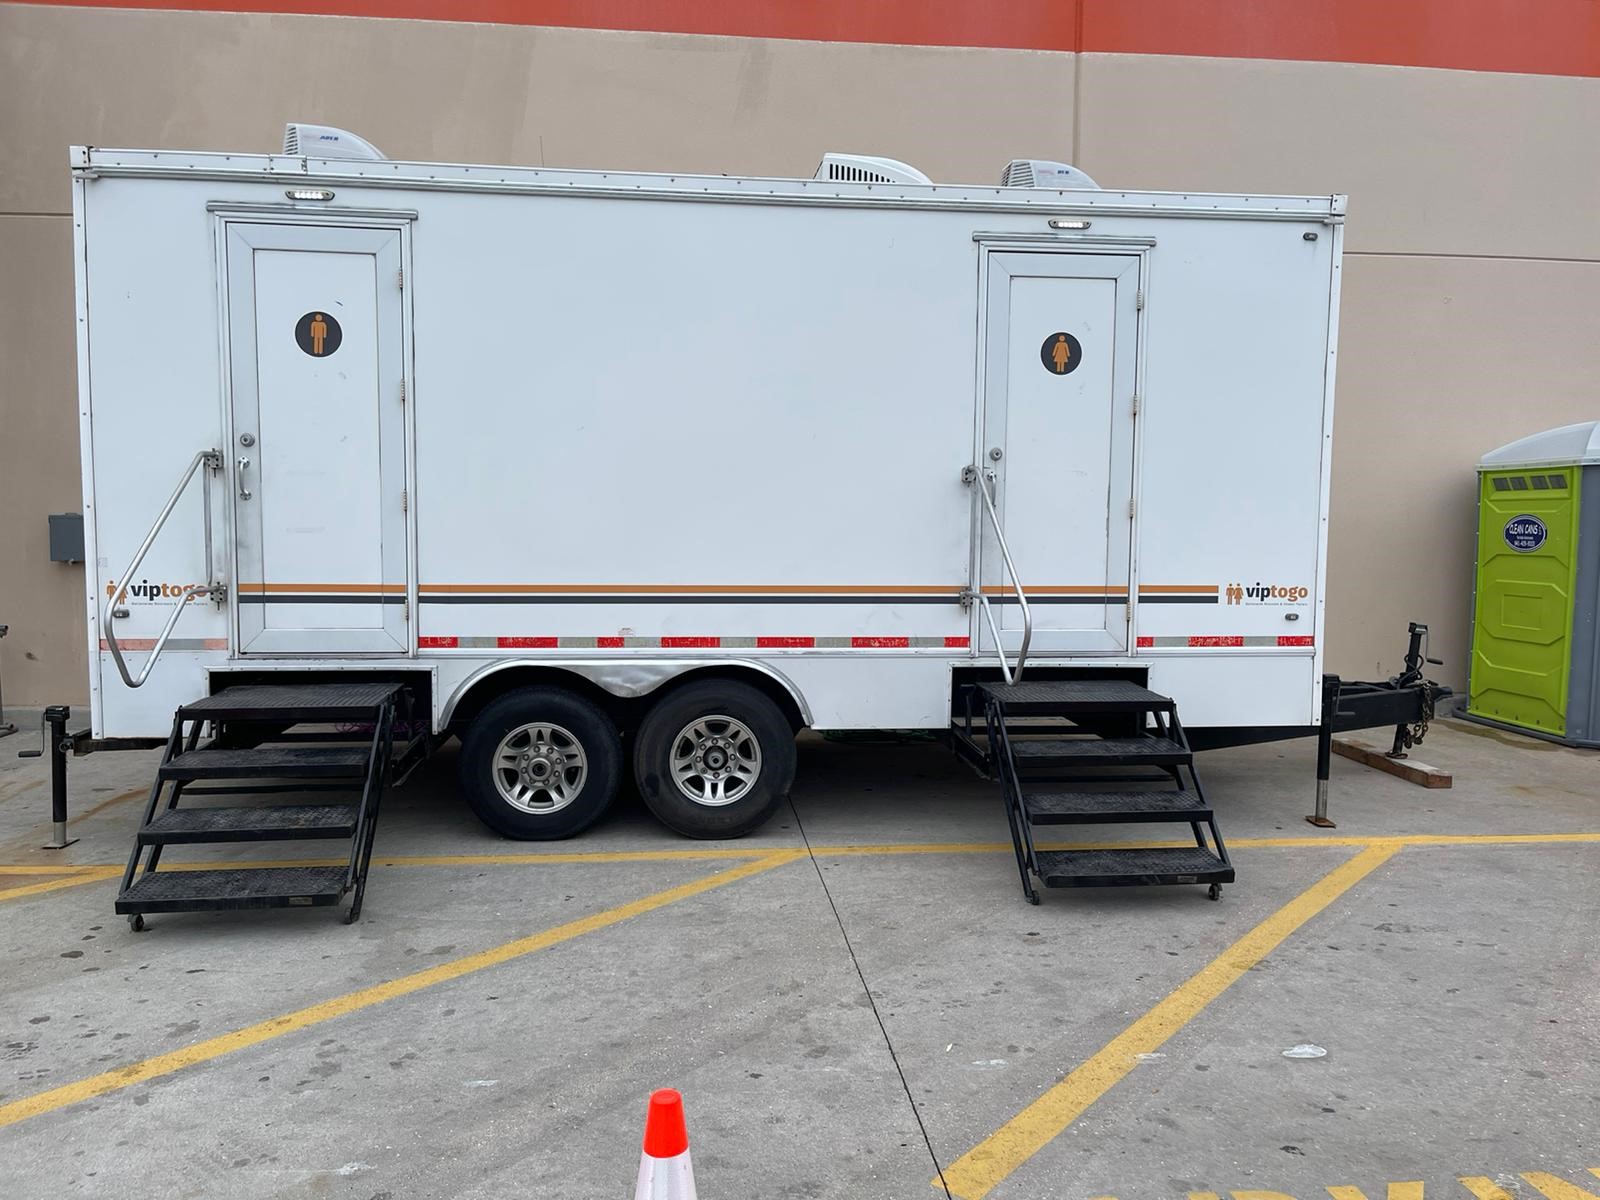 A restroom trailer outside a store location